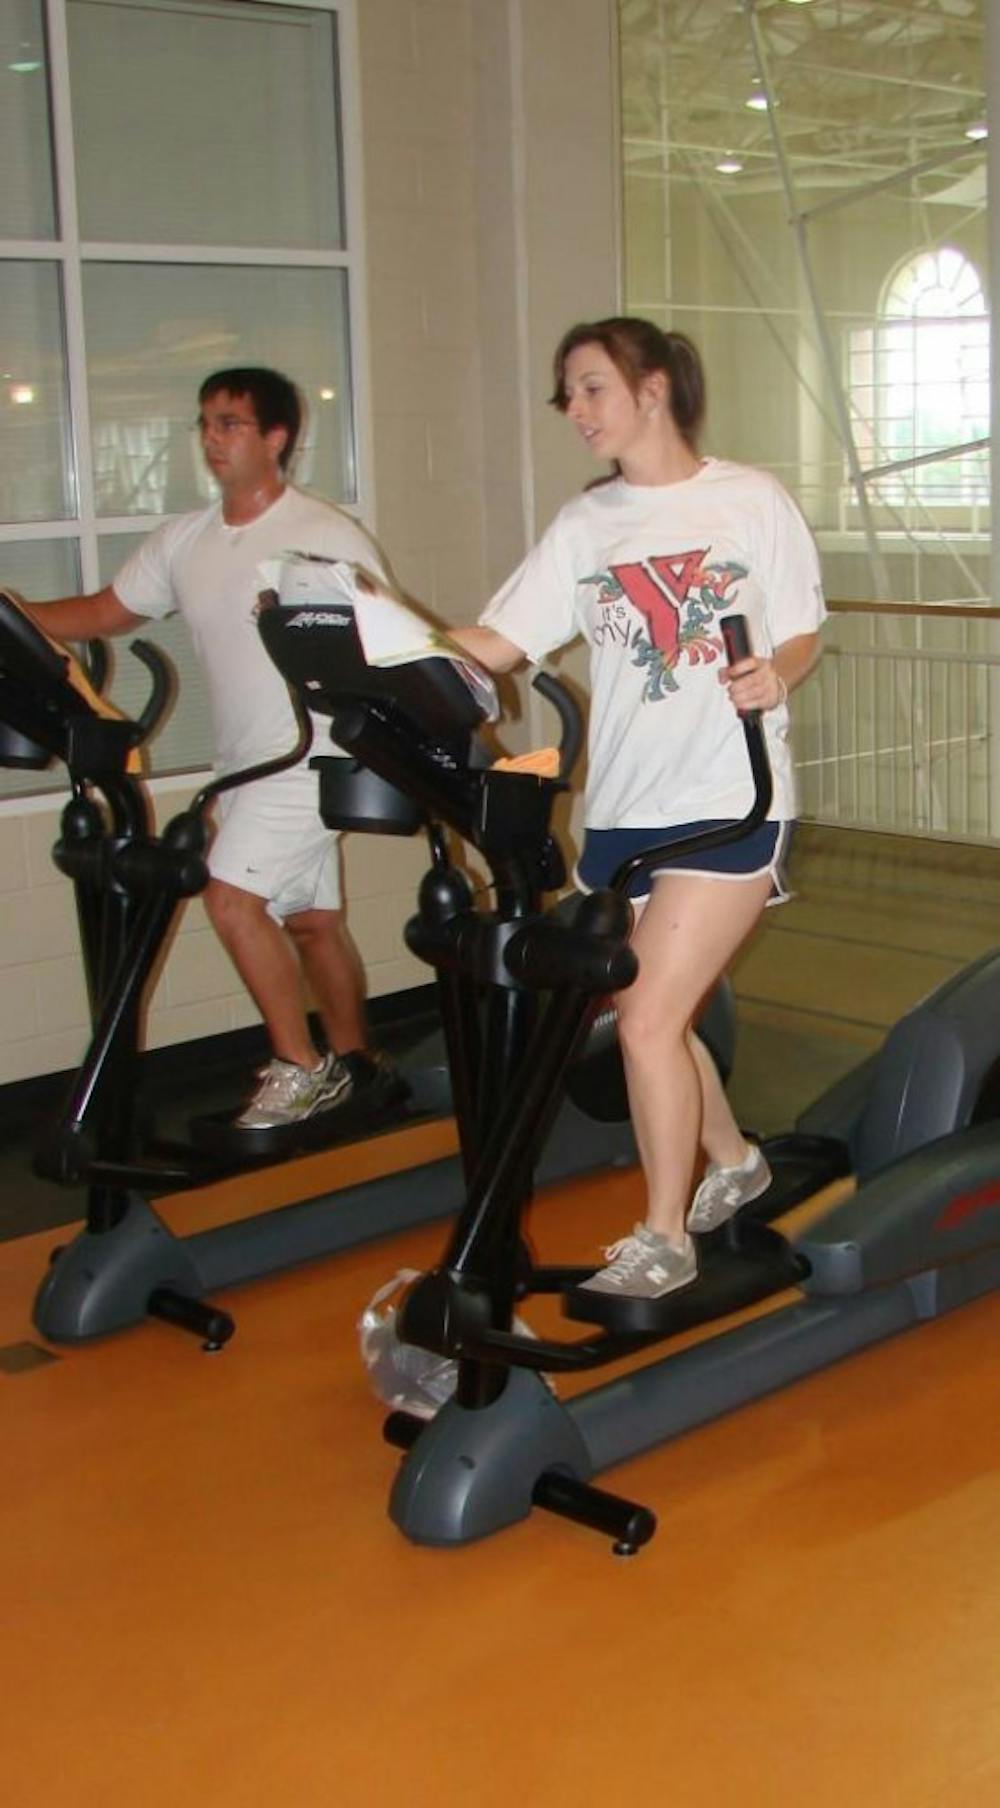 The Mercer University gym is open long hours, which gives students the opportunity to work out before or after classes. Excercise, along with a healthy diet, can stave off extra weight,